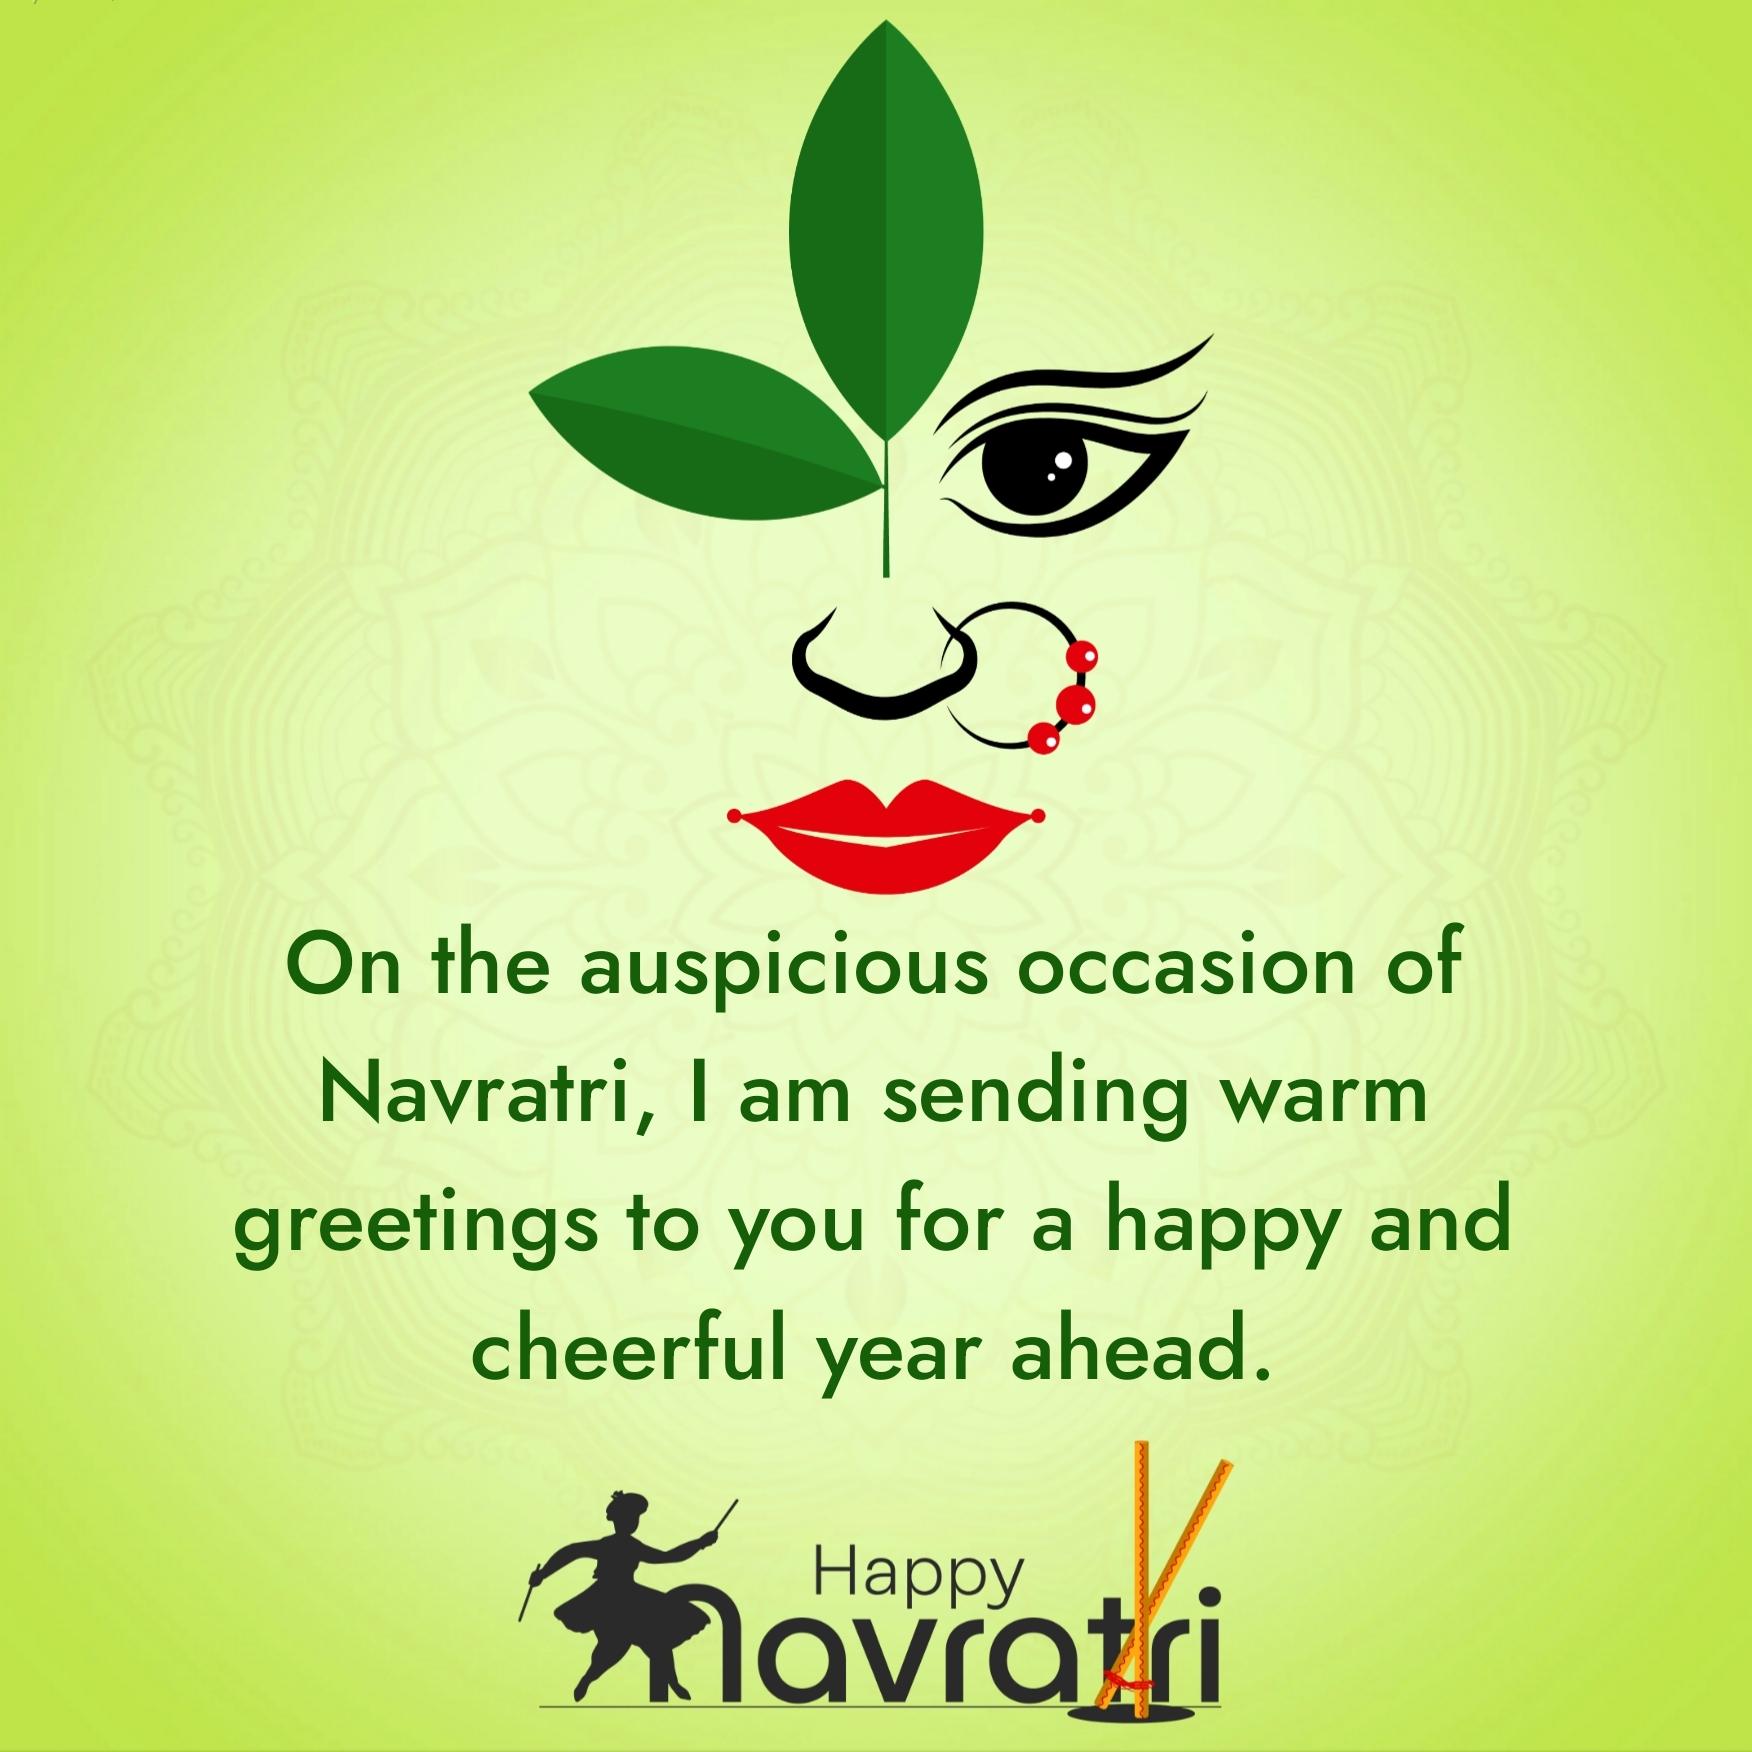 On the auspicious occasion of Navratri I am sending warm greetings